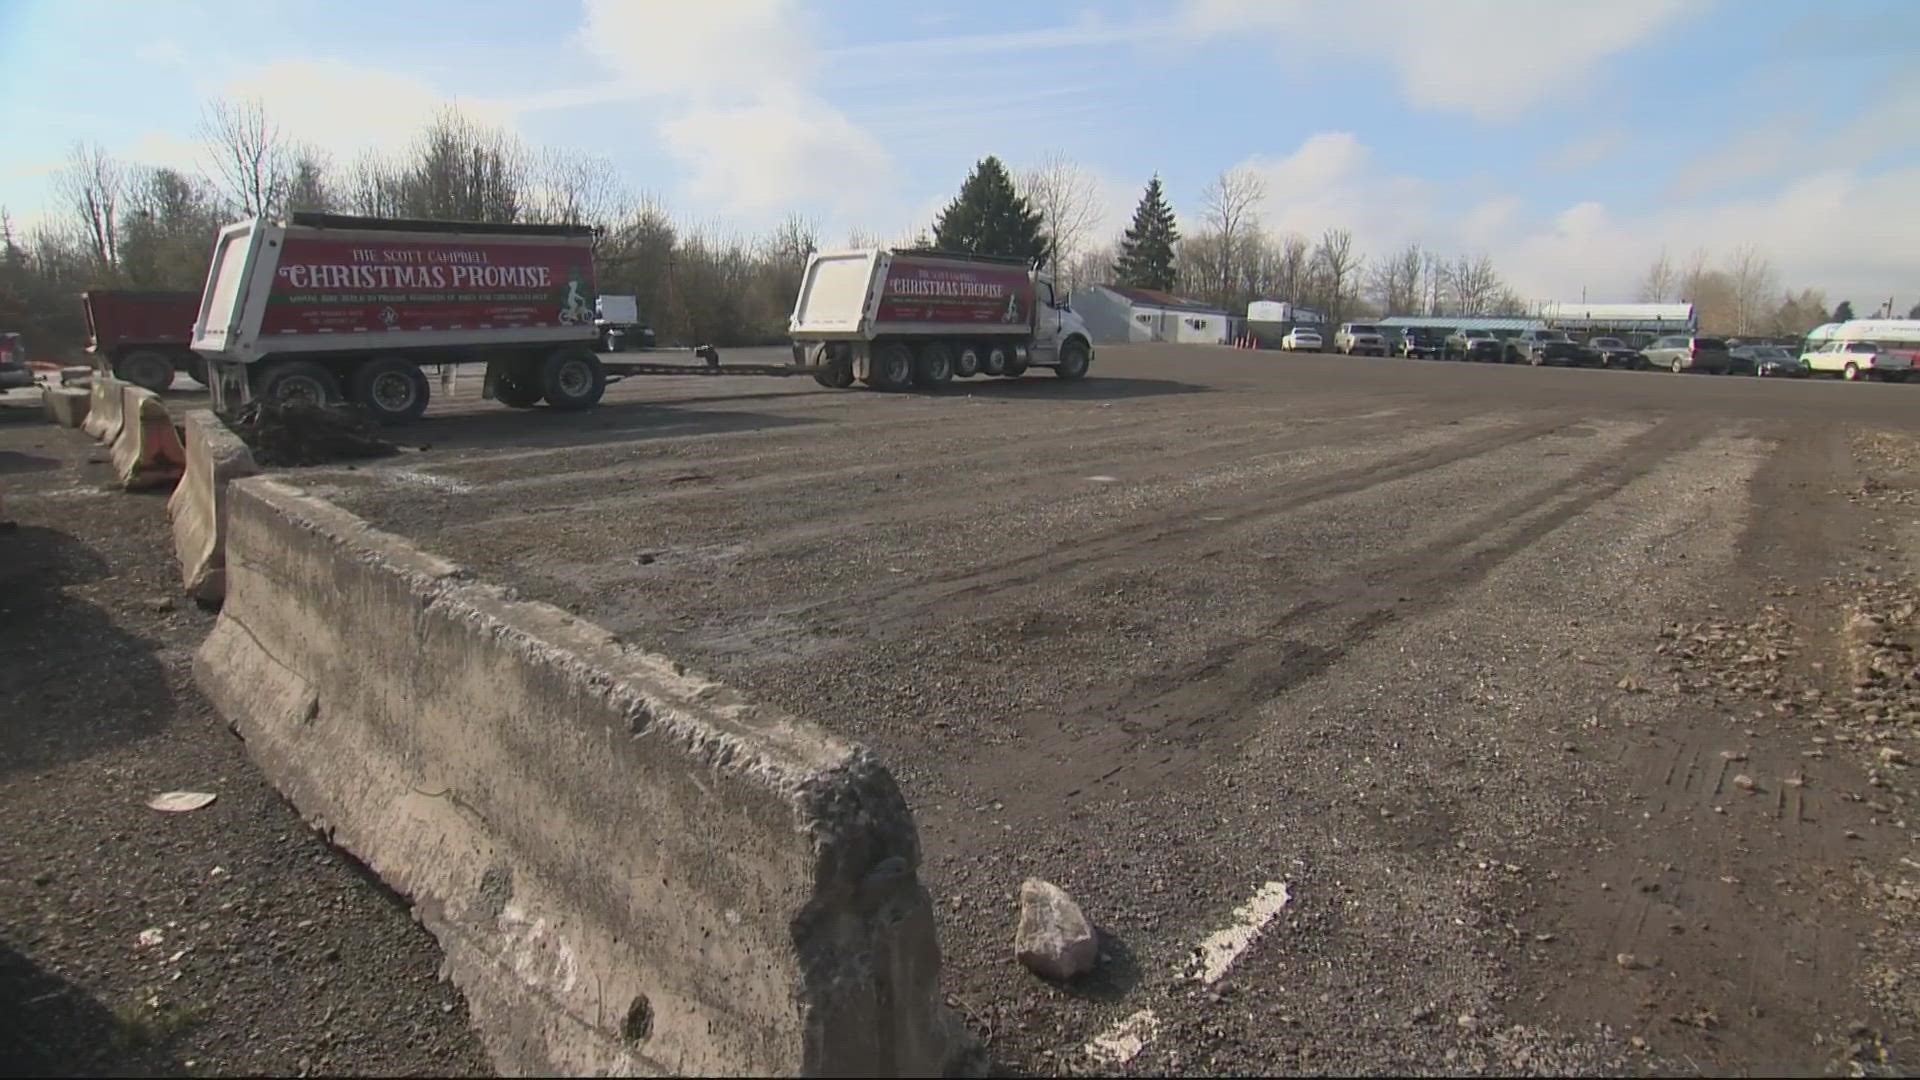 Construction materials company, Knife River is looking to expand in the North Vancouver area, but residents are not happy about the plan.